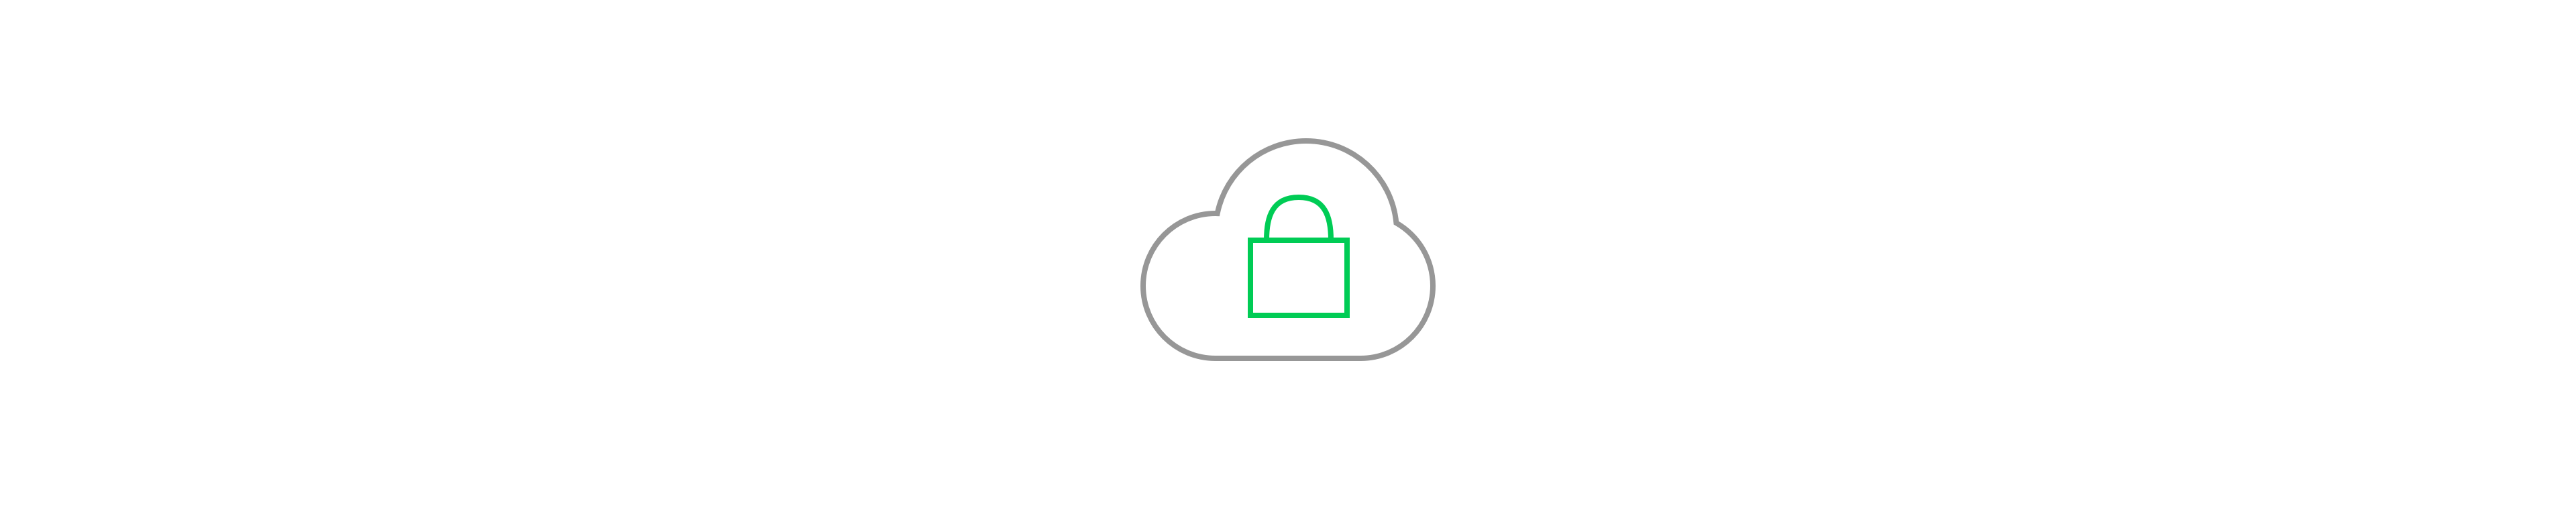 End-to-end encrypted data in the cloud is not threatened by Meltdown and Spectre